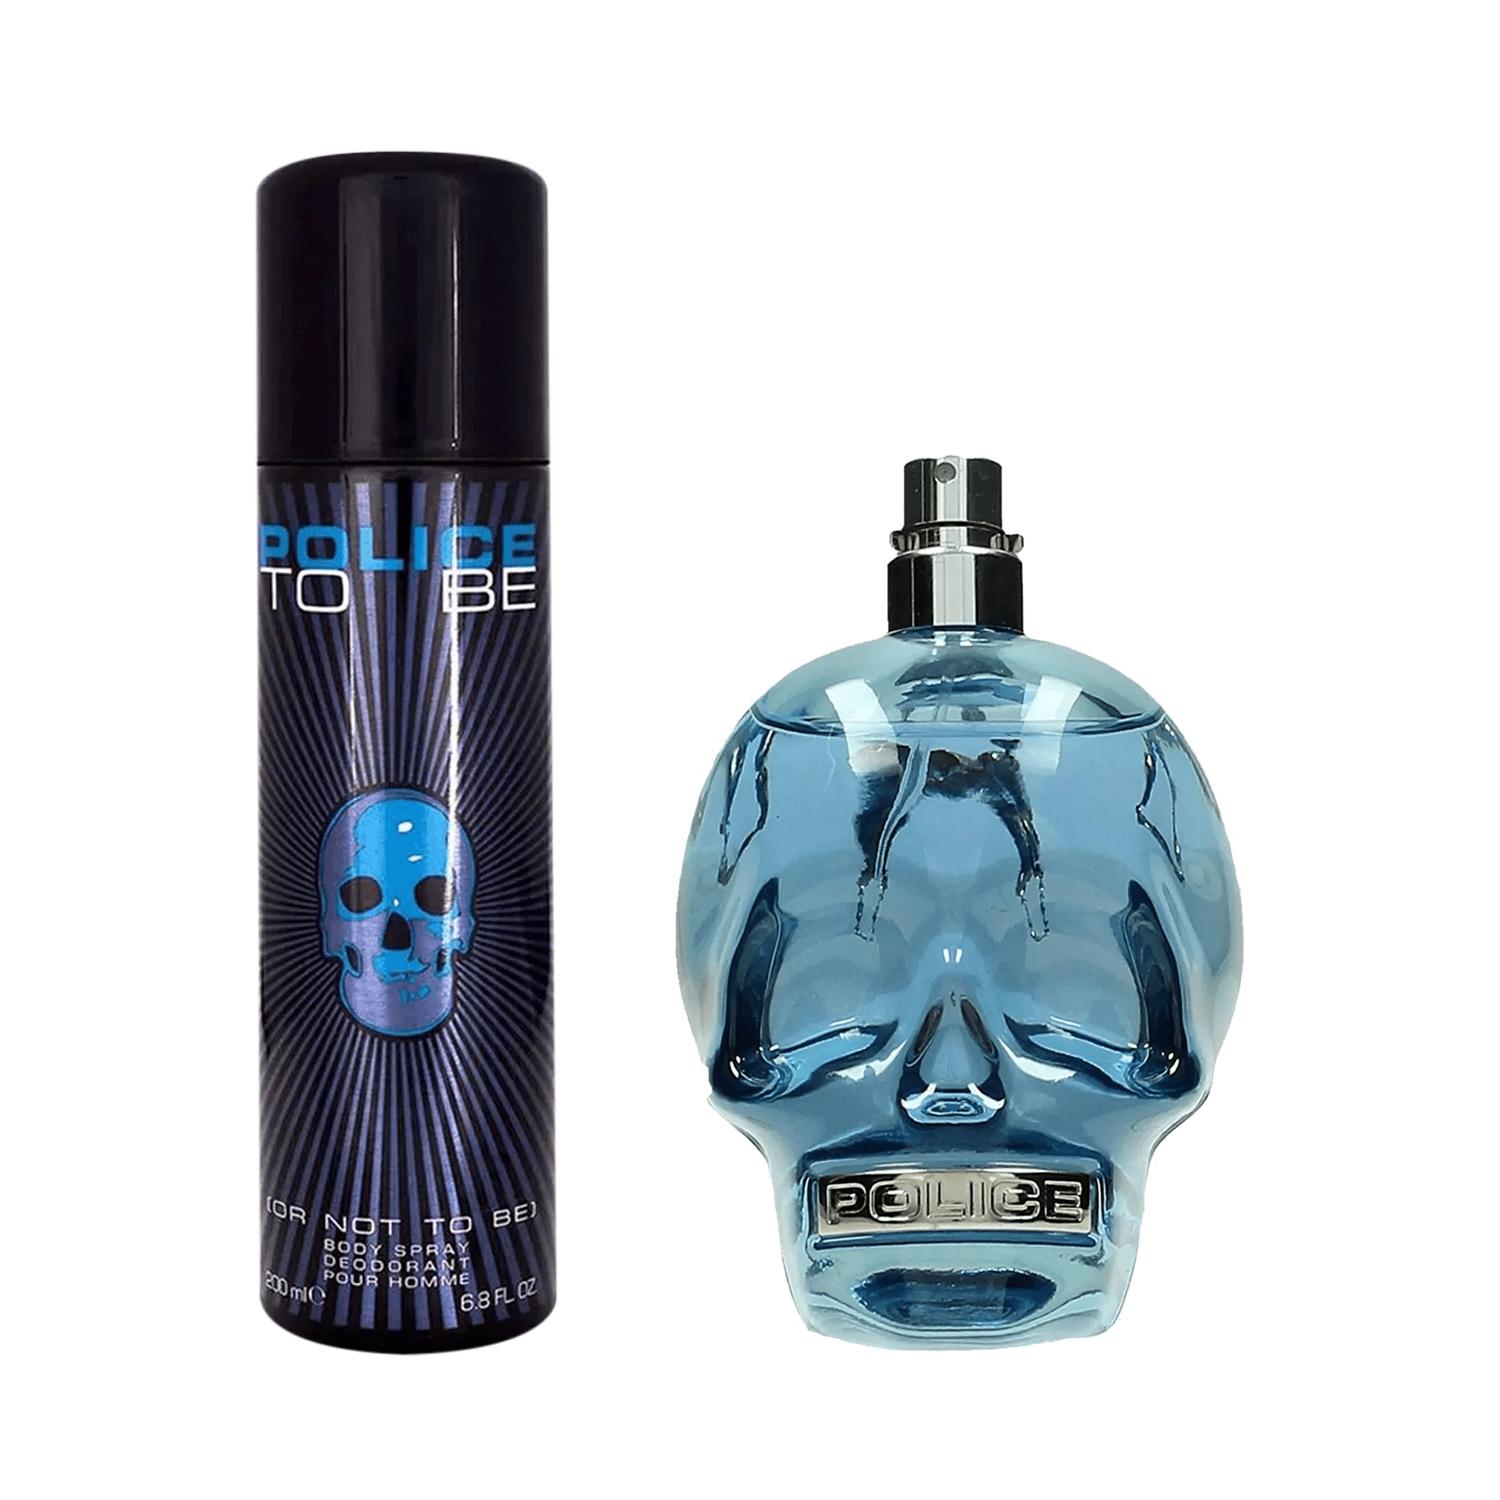 Police | Police To Be Man EDT + Deodorant Spray (Pack of 2) Combo